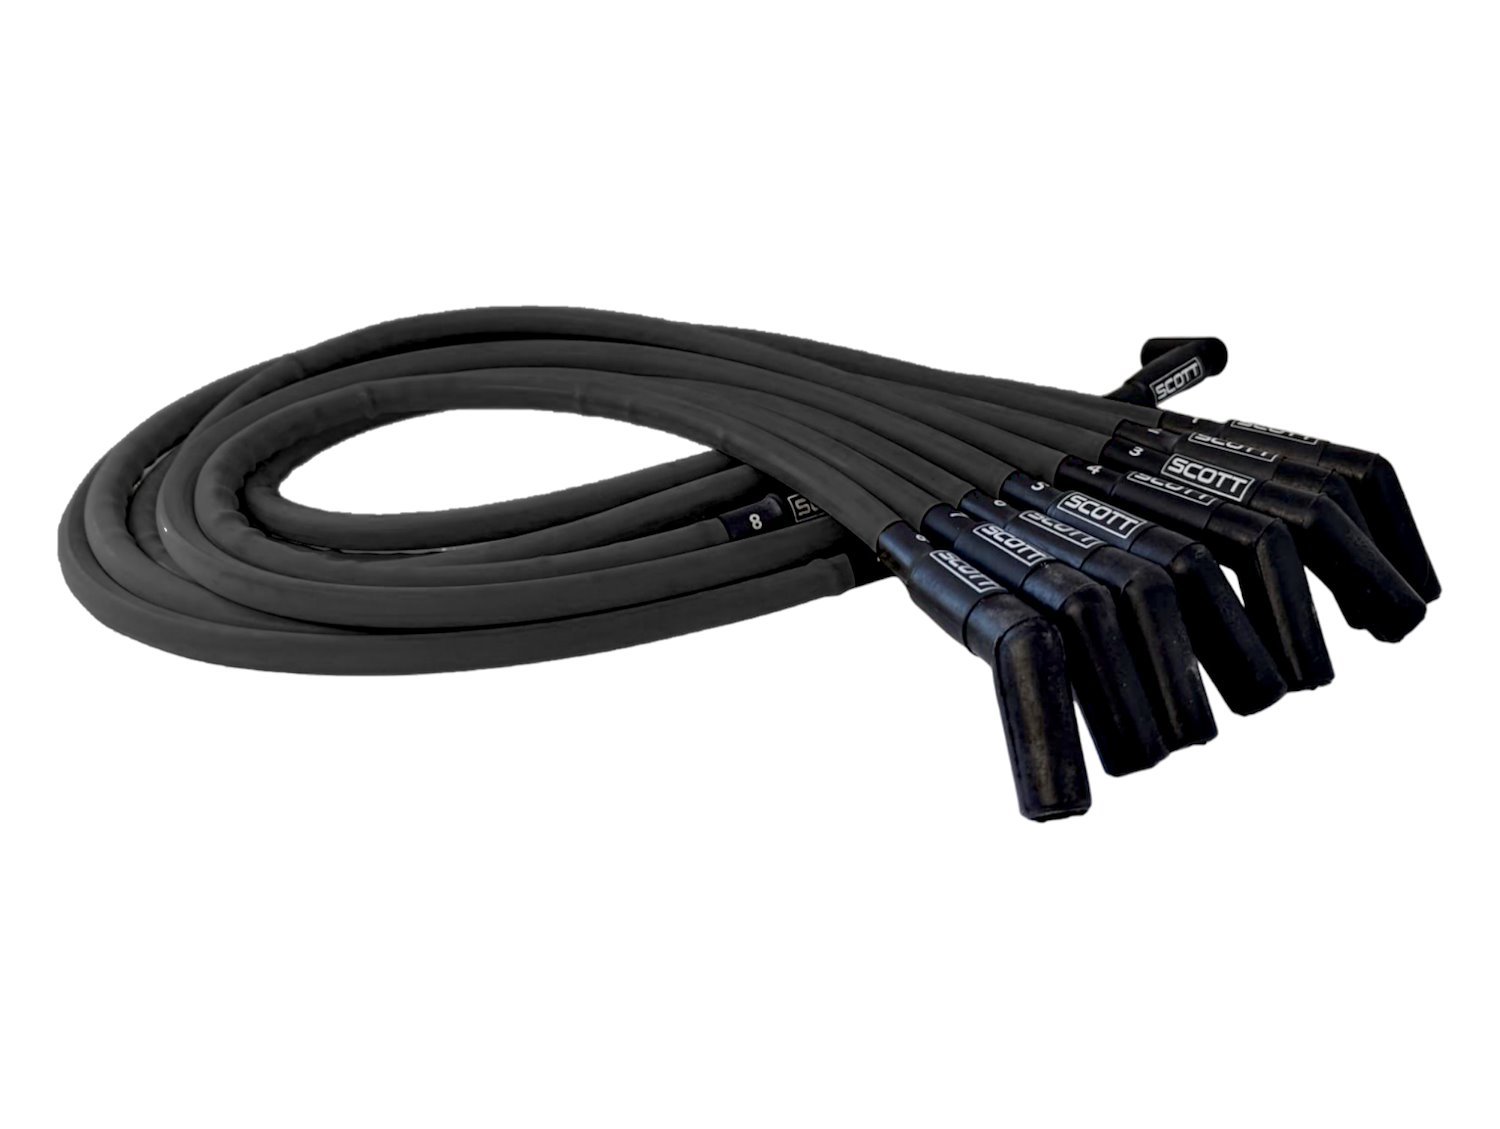 SPW-CH-415-1 High-Performance Silicone-Sleeved Spark Plug Wire Set for Big Block Chevy, Over Valve Cover [Black]